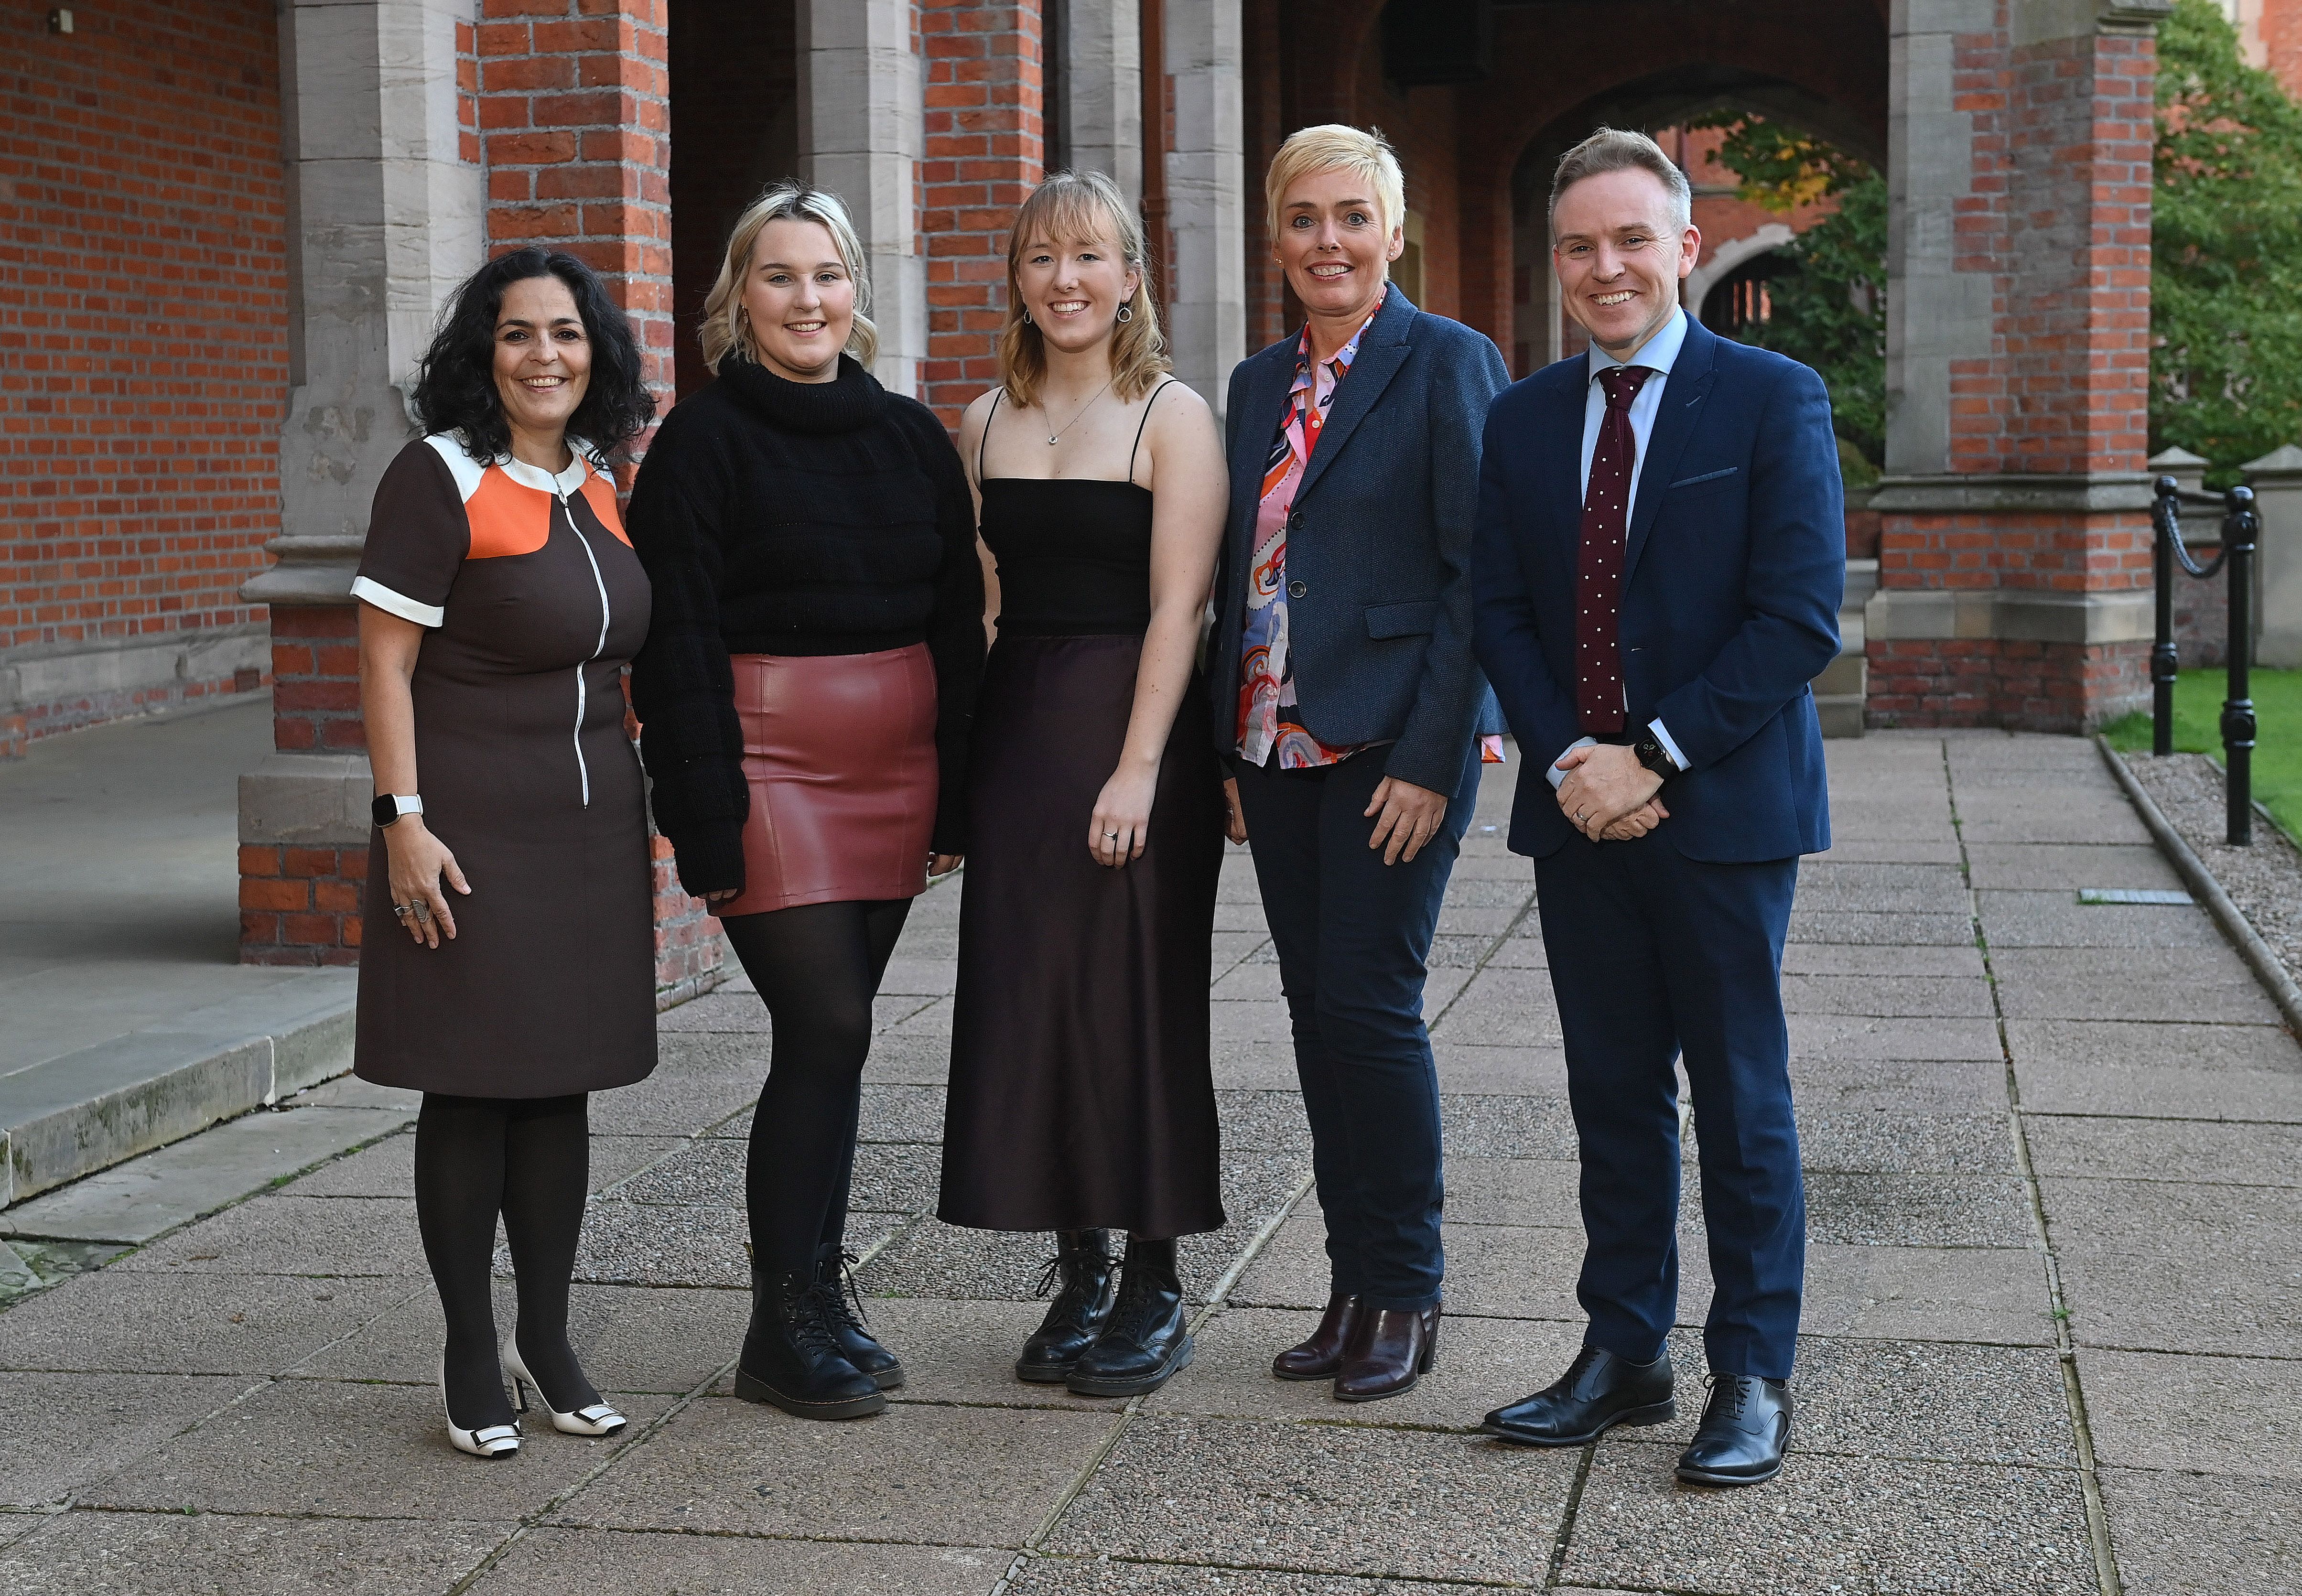 At the launch of the new Ianguage residential scheme at QUB were Dr Véronique Altglas, Tiarna Ní Néill , Liadán NicCormaic, Professor Margaret Topping, Pro-Vice-Chancellor and Ryan Feeney